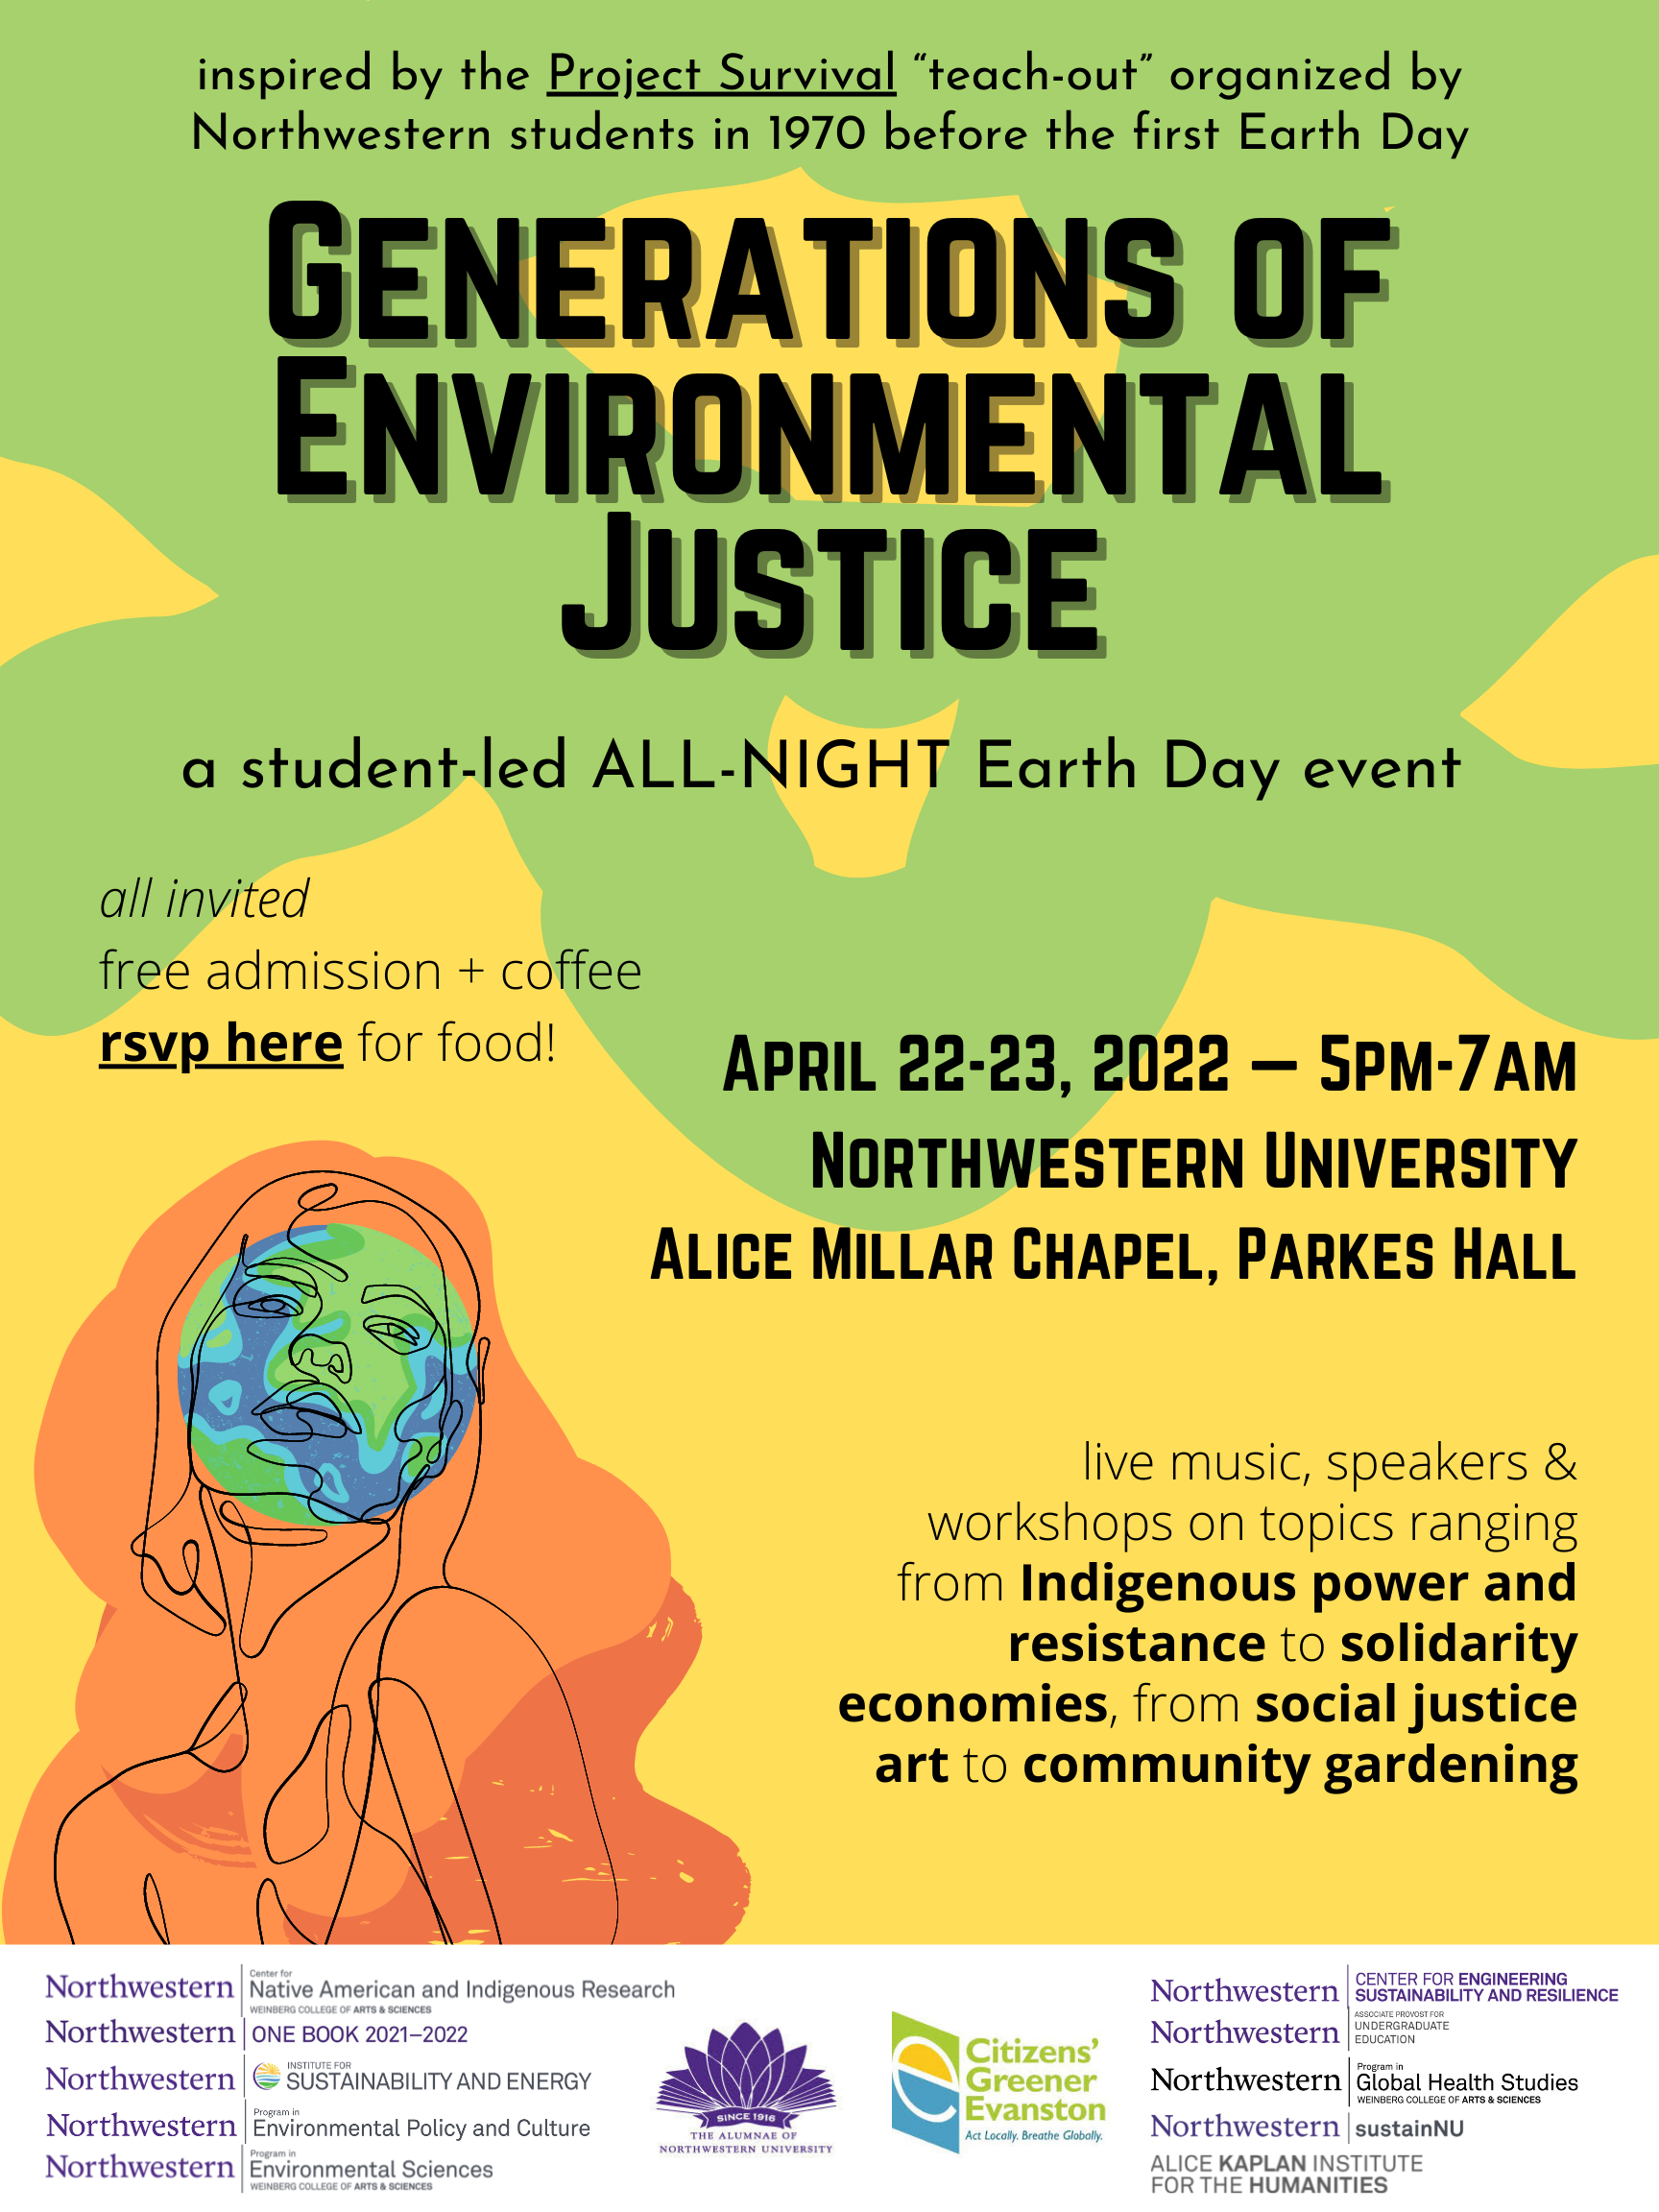 This poster describes an event happening on Friday April 22nd at Northwestern University to address the environmental and climate crisis. A variety of workshops will be held.